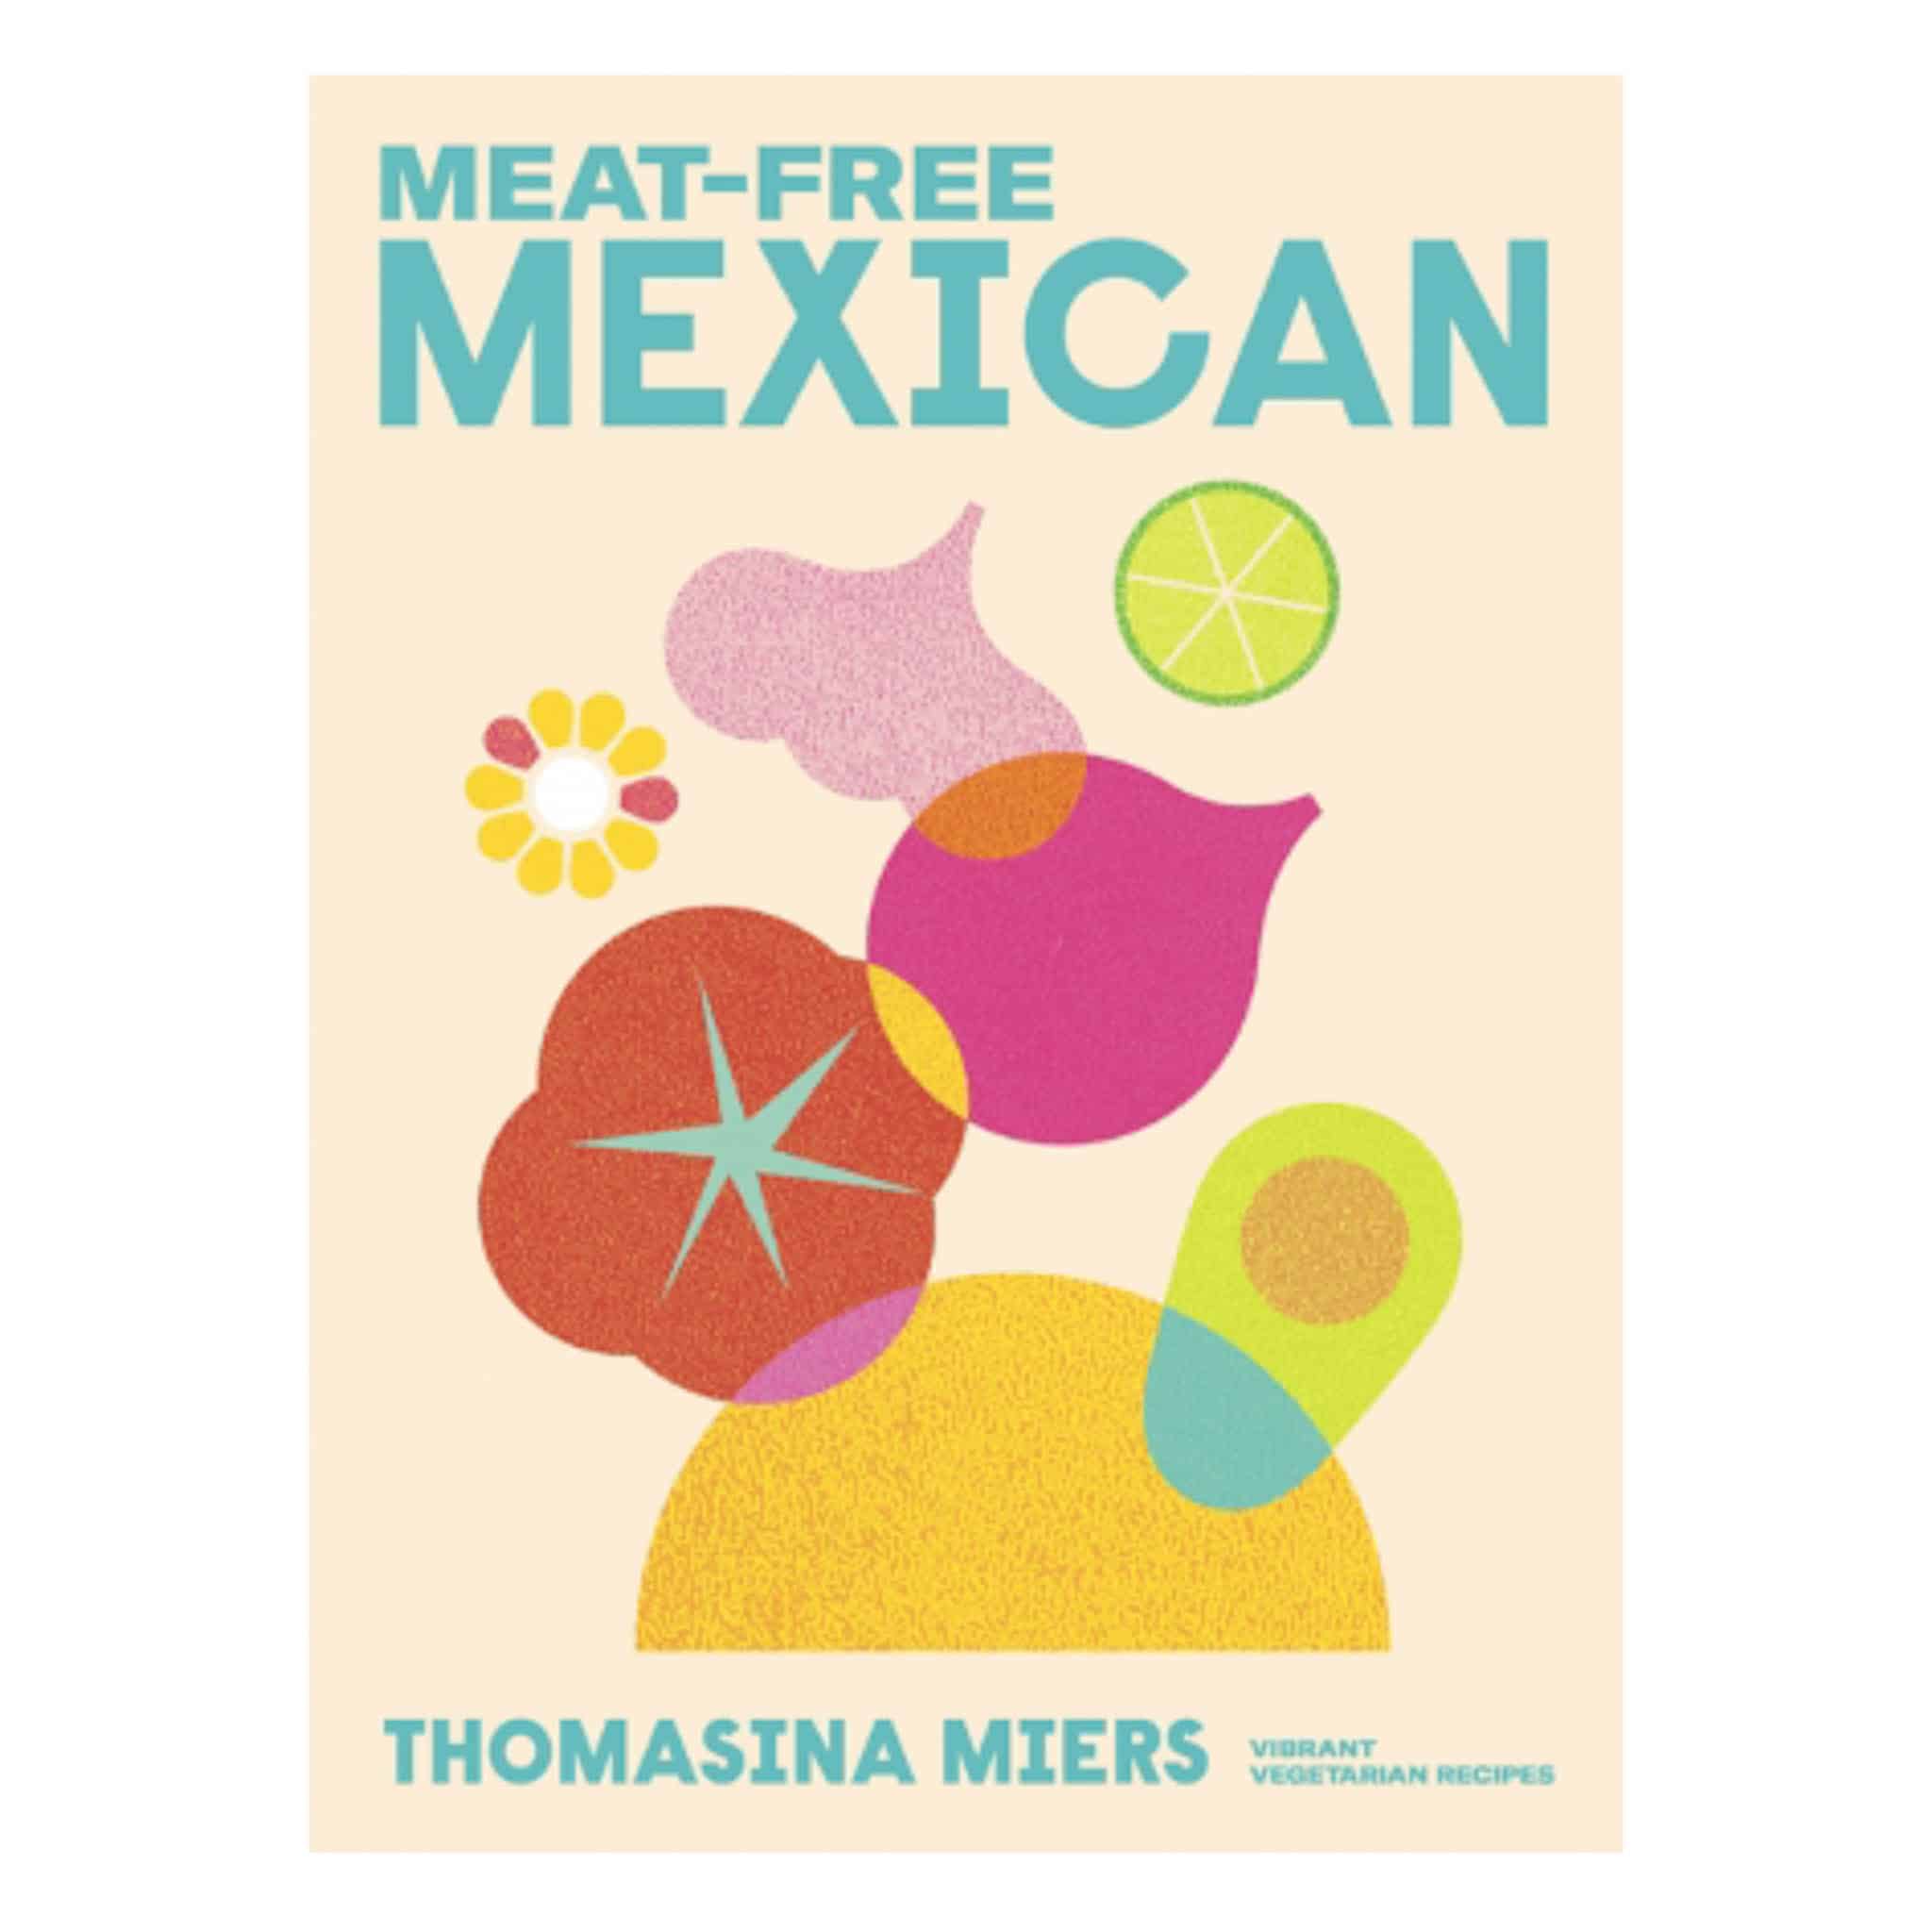 Meat-free Mexican, by Thomasina Miers